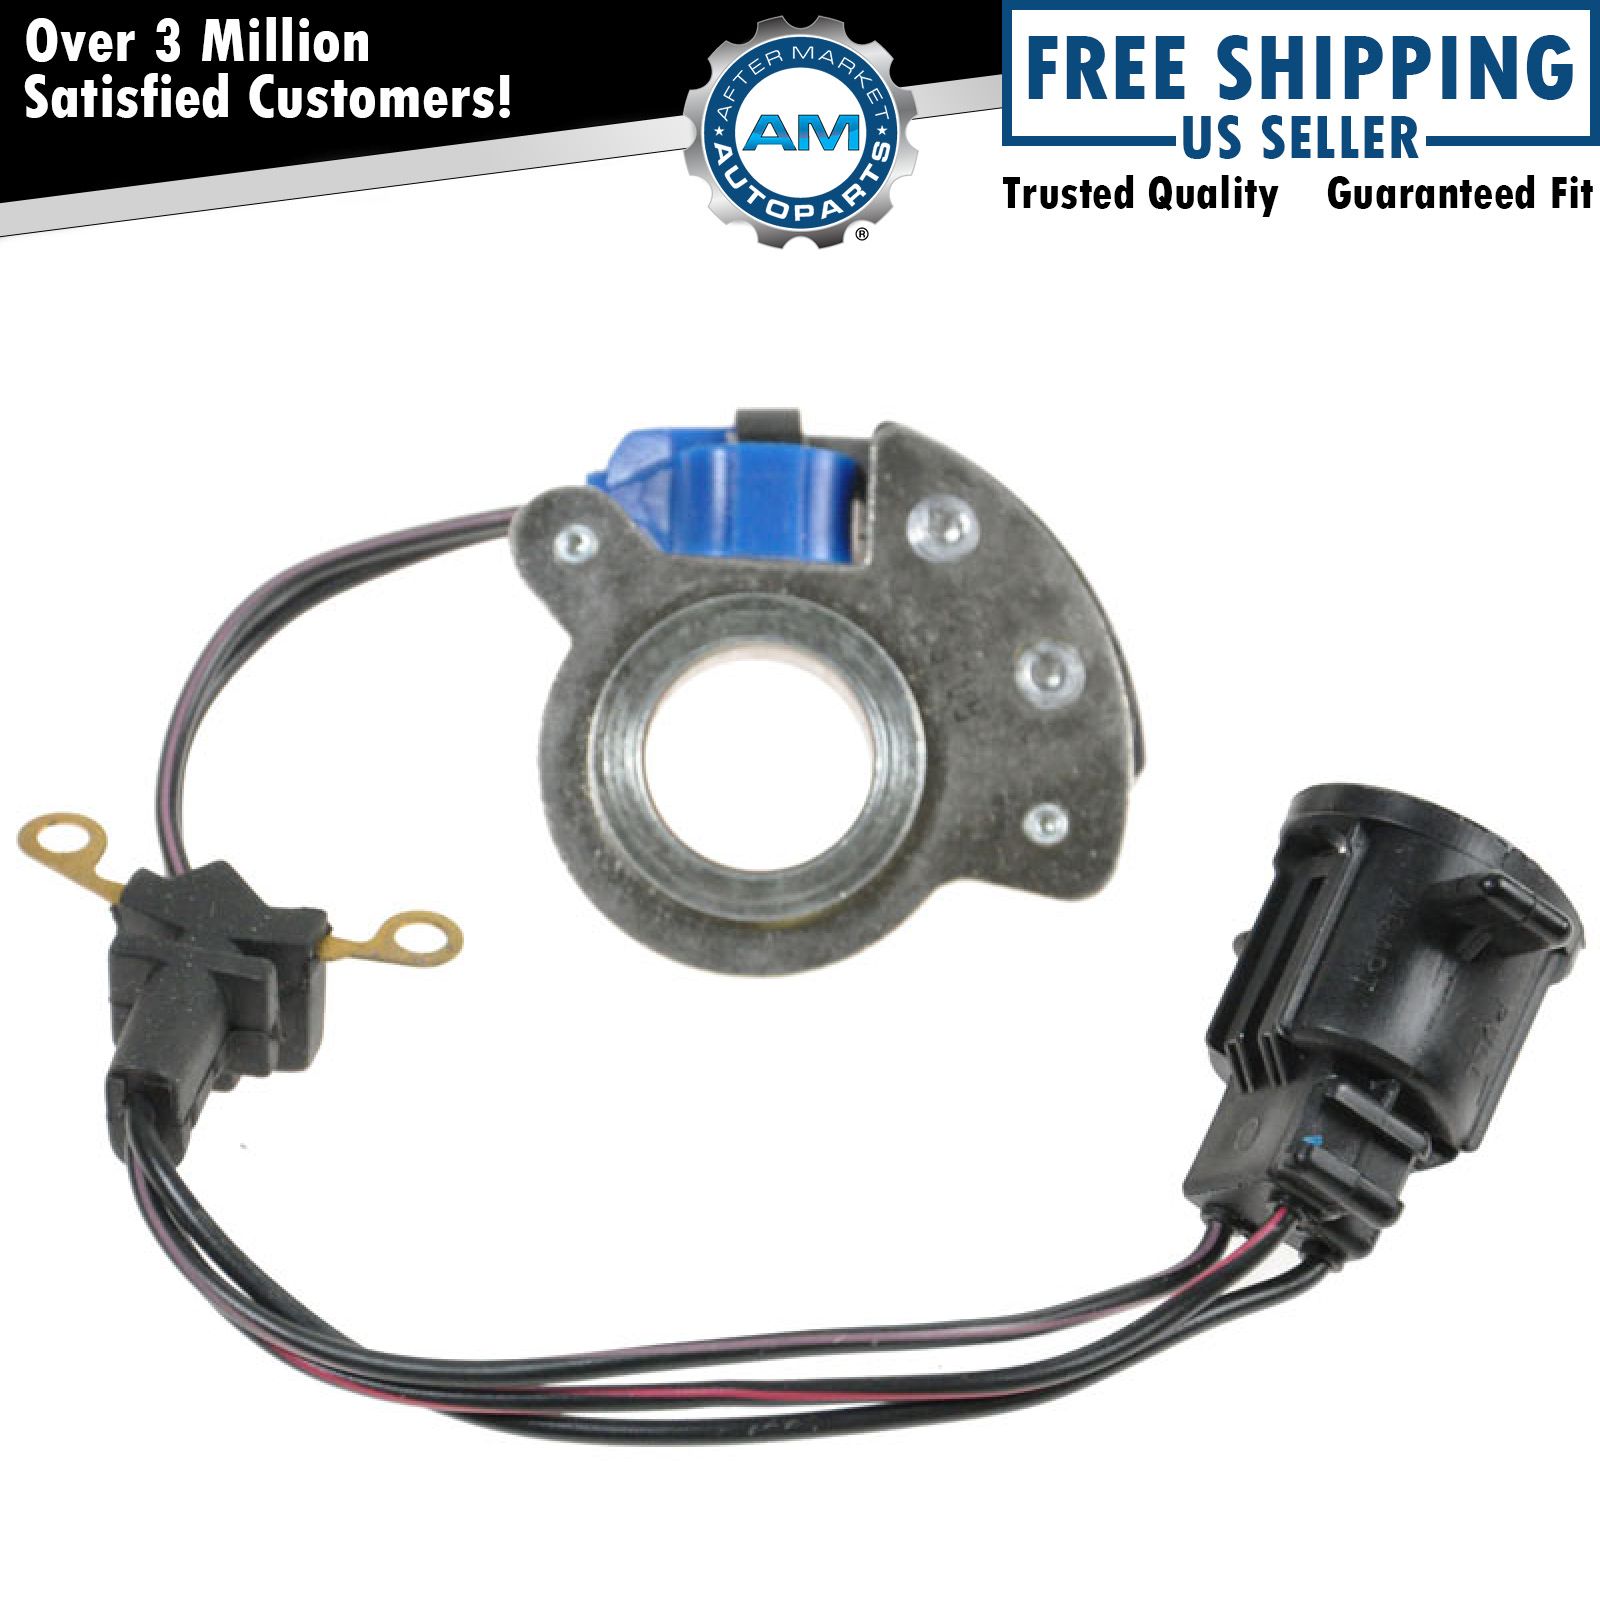 Distributor Ignition Pick-Up Assembly For Ford F150 Pickup Truck Lincoln Mercury